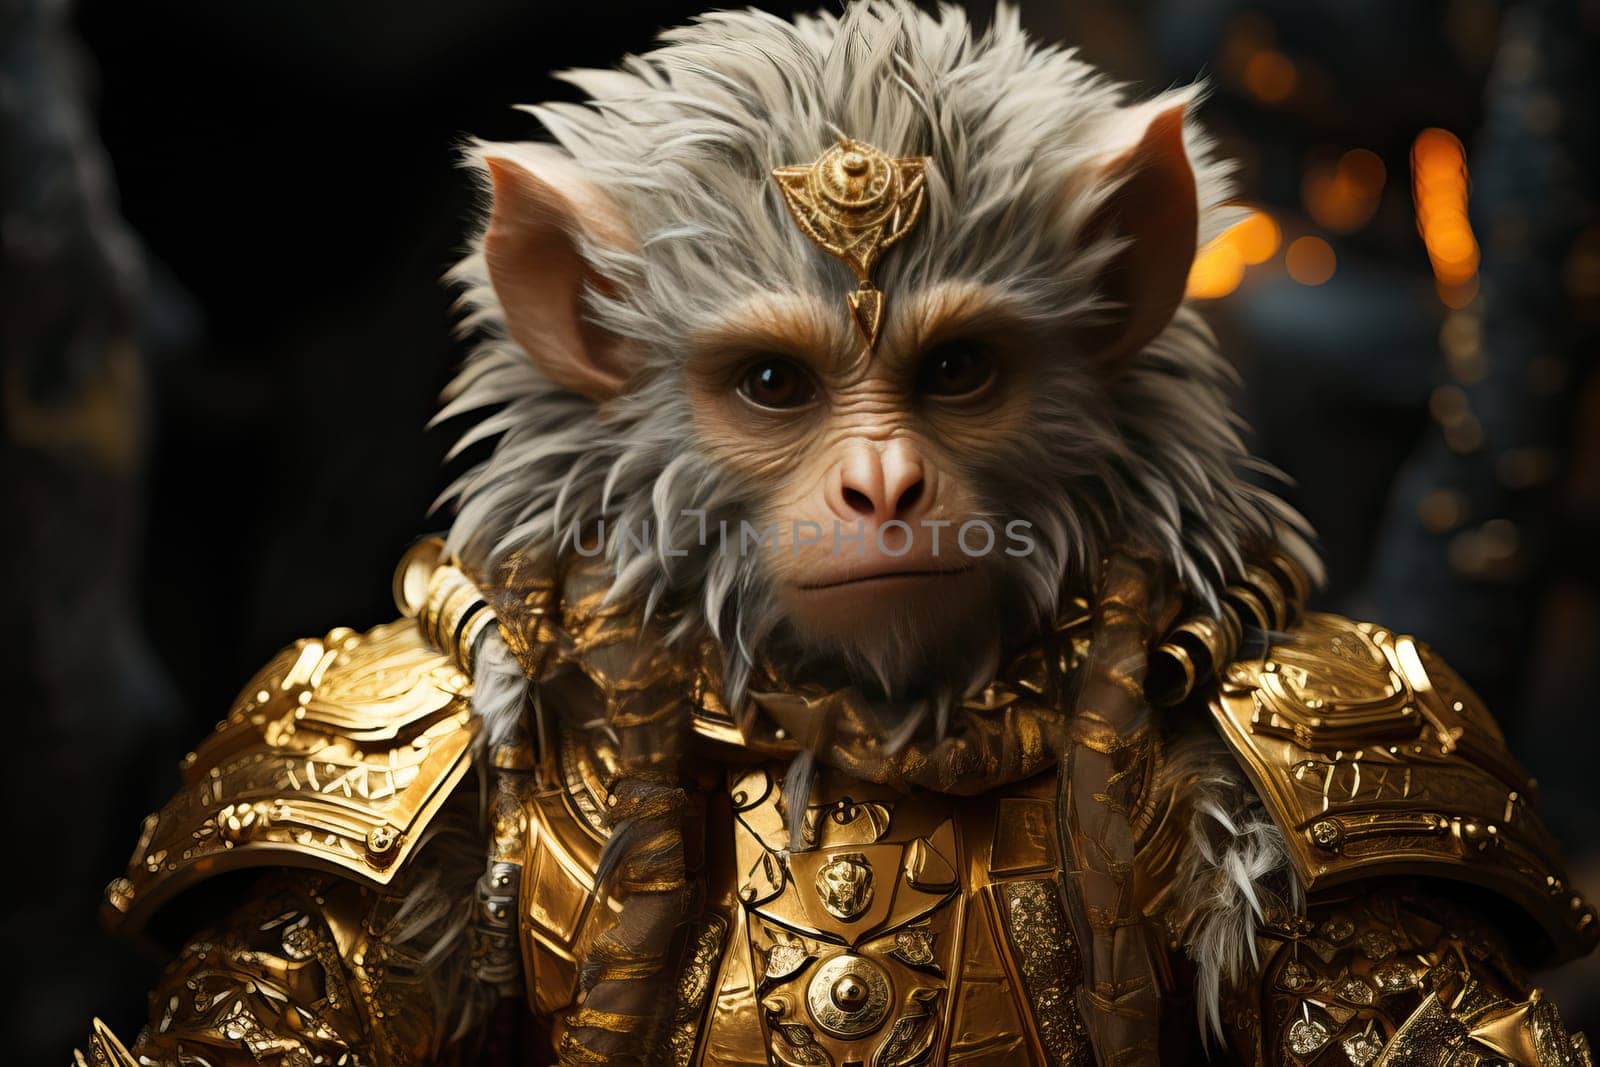 A small white monkey dressed in a golden uniform, a warrior monkey.